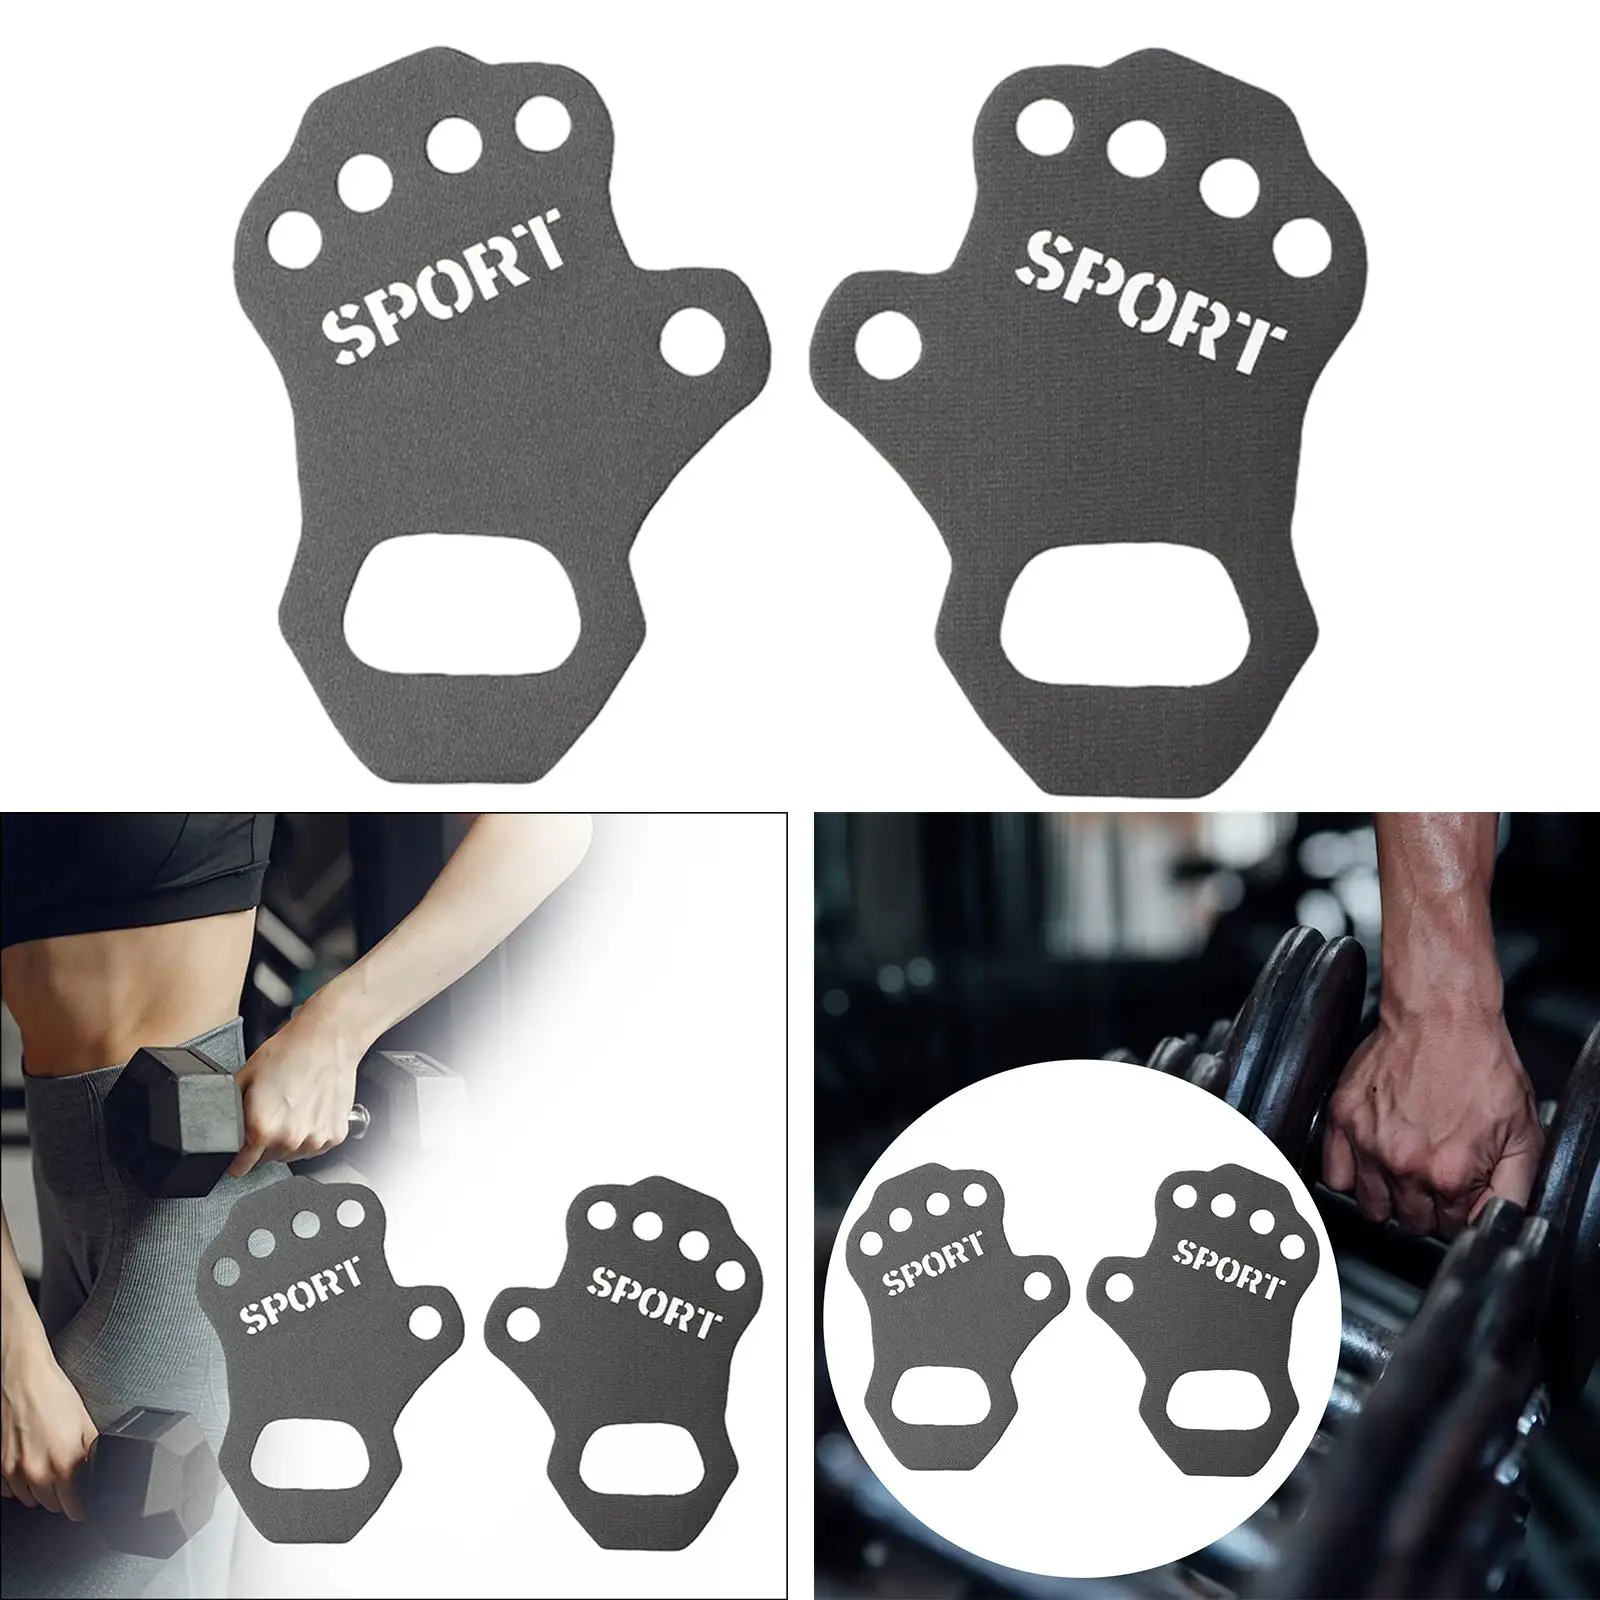 Weight Lifting Gloves Hand Grips Palm Protector Comfort Fitness Gloves Workout Gloves Deadlift Strength Training Gym Hanging